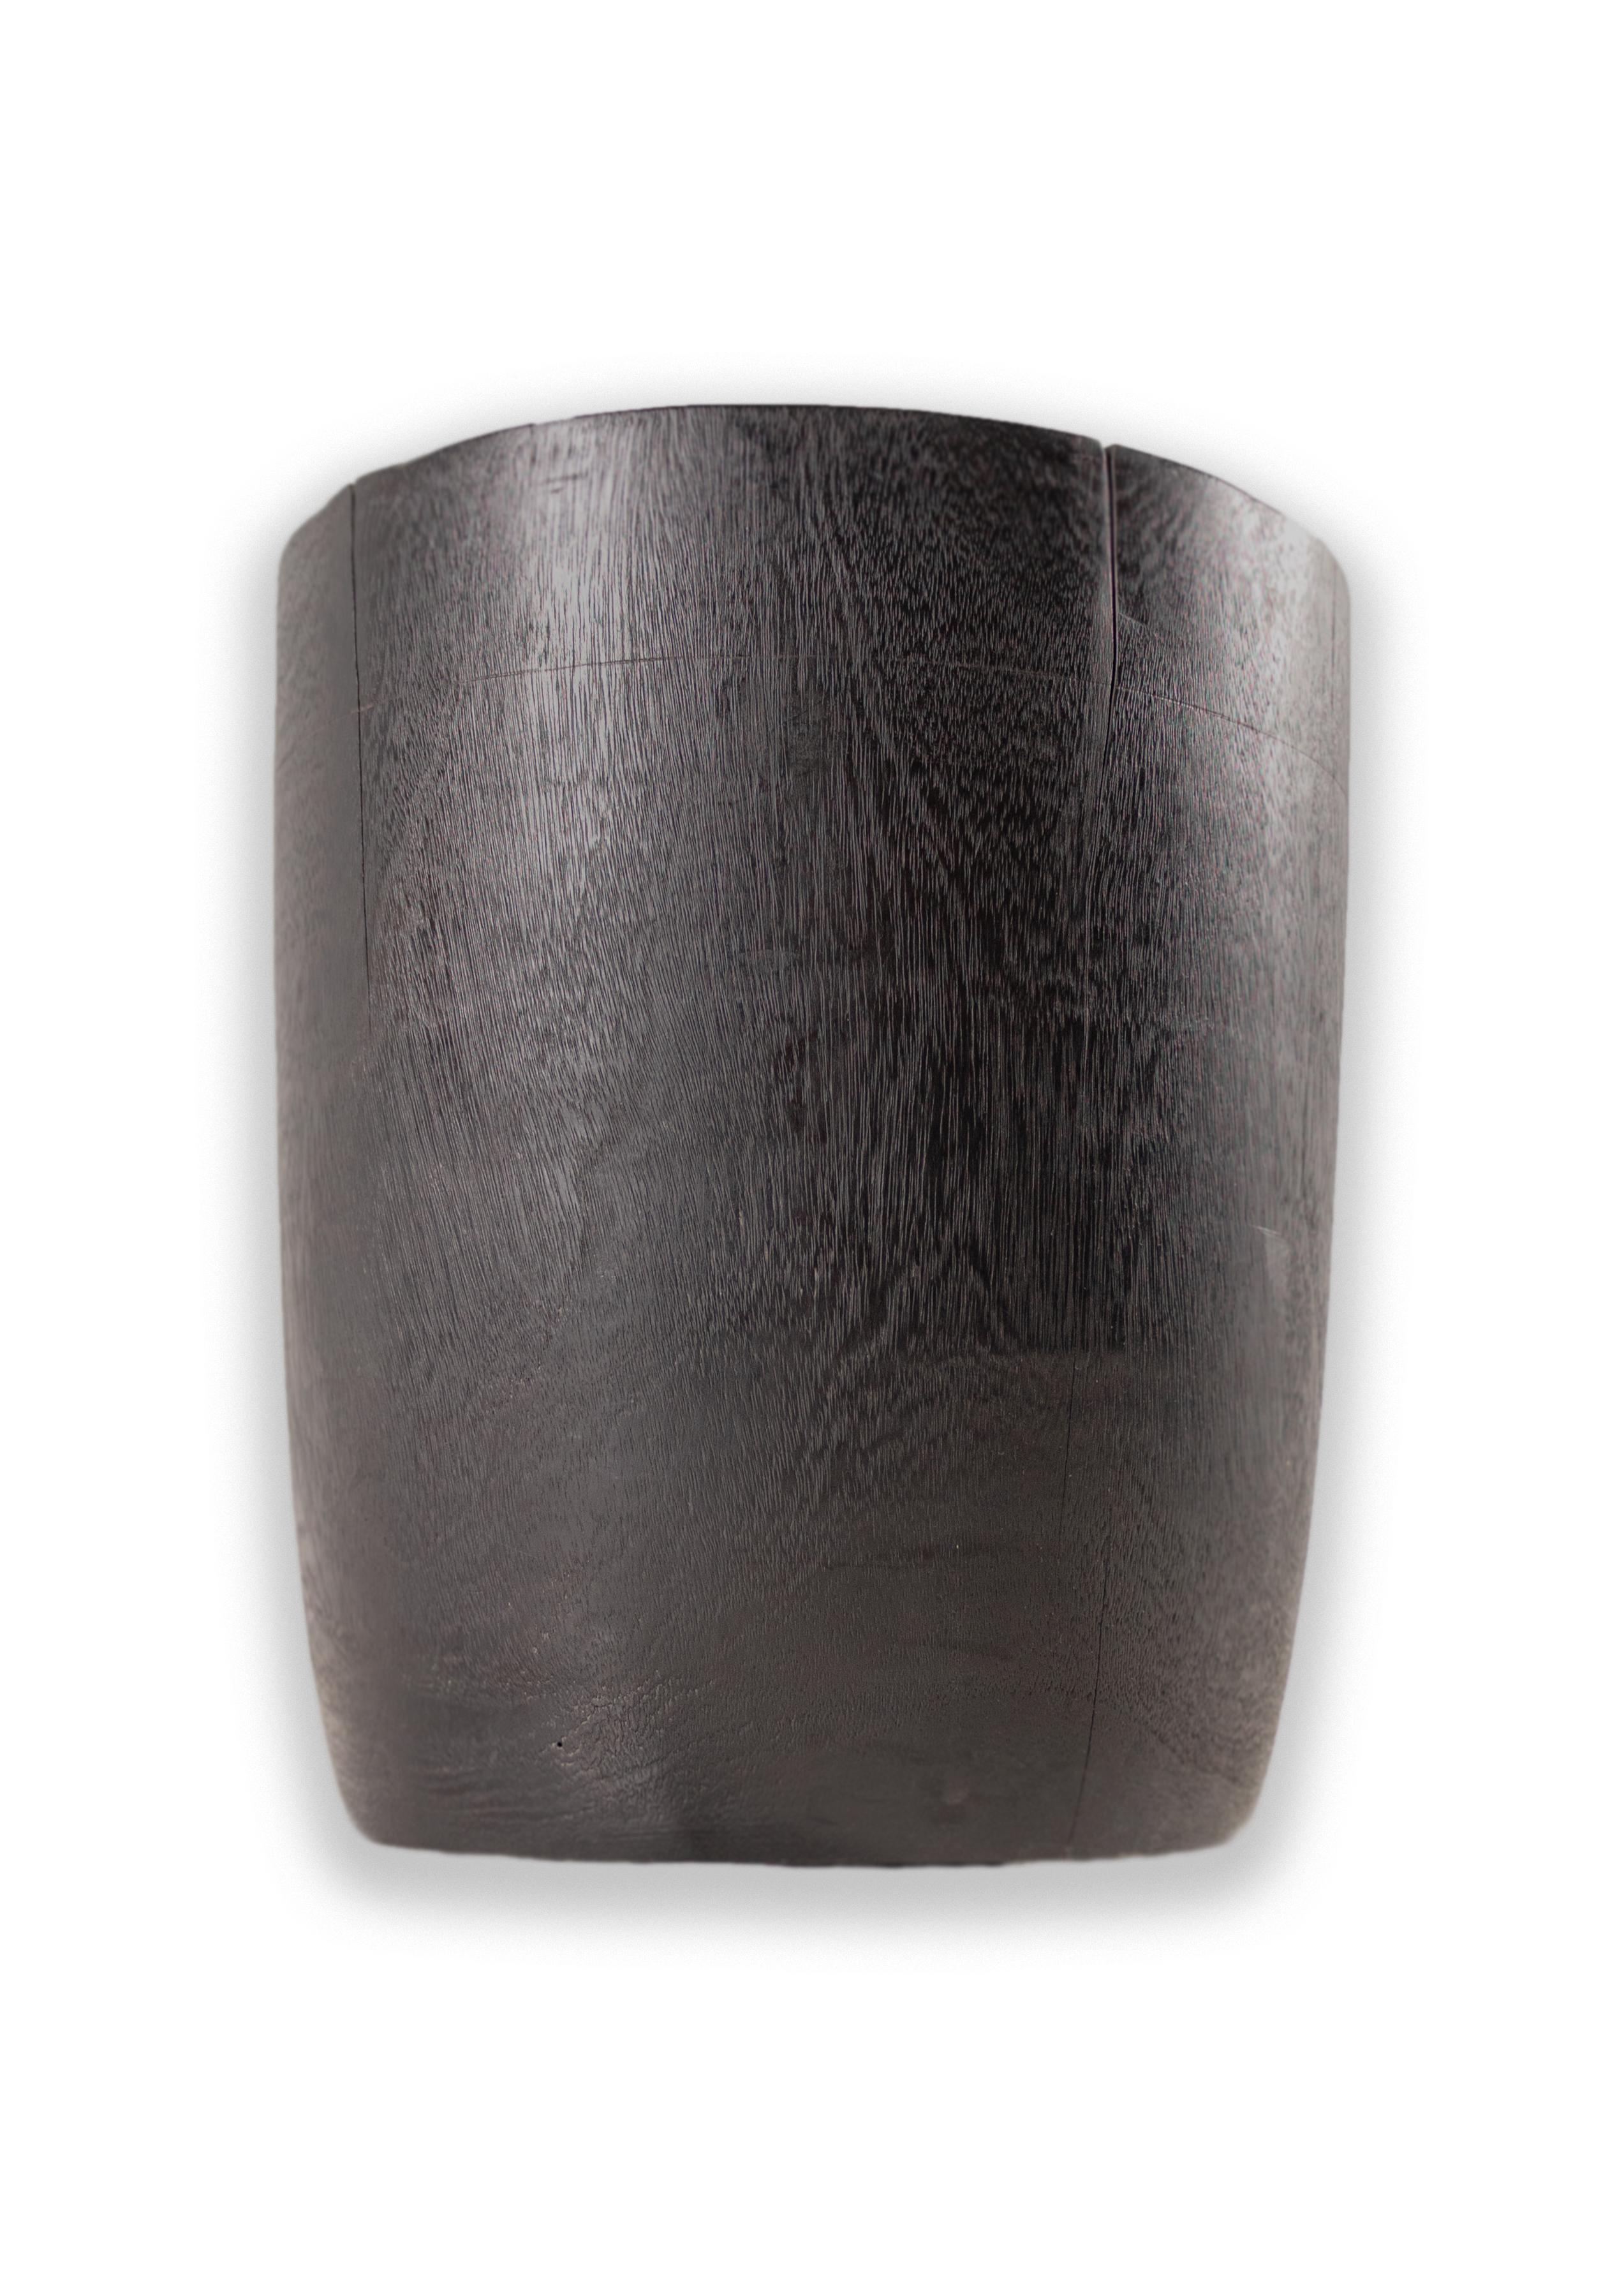 Ebonized drum form end table.

Piece from our one-of-a-kind collection, Le Monde. Exclusive to Brendan Bass. 


Globally curated by Brendan Bass, Le Monde furniture and accessories offer modern sensibility, provincial construction, and